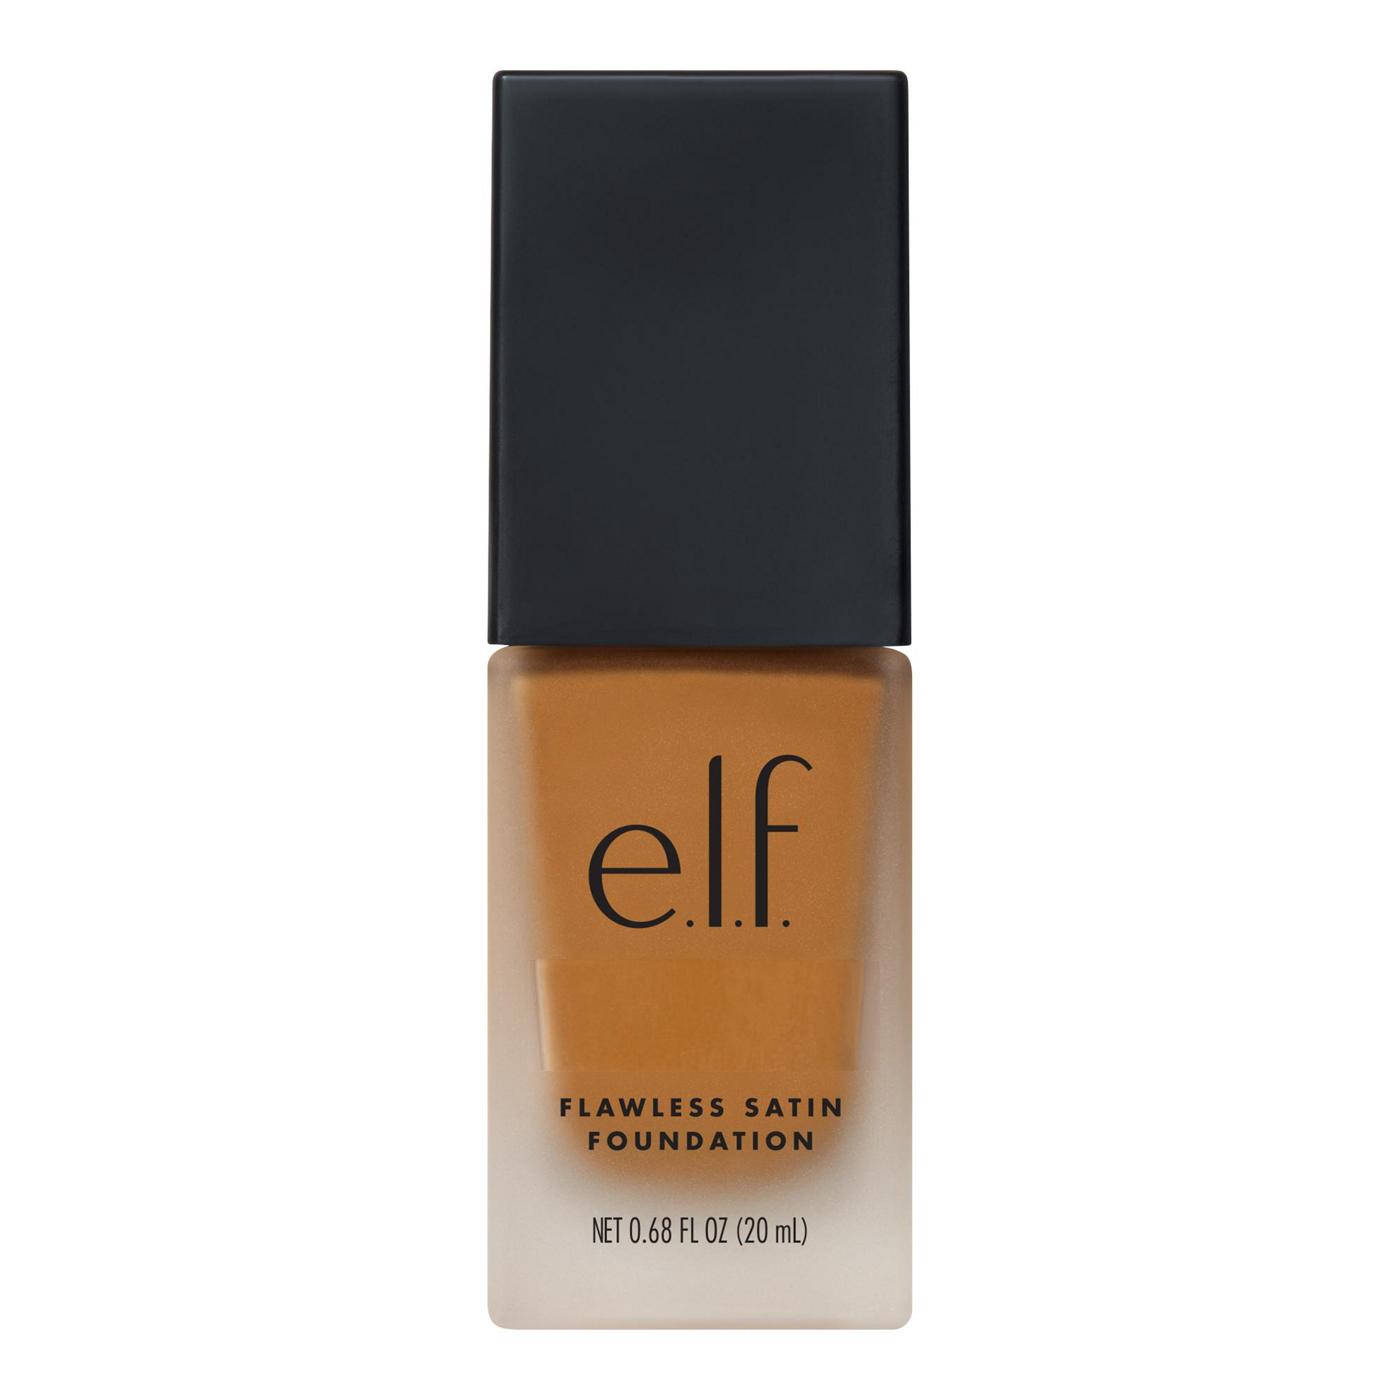 e.l.f. Flawless Satin Foundation - Latte; image 1 of 5